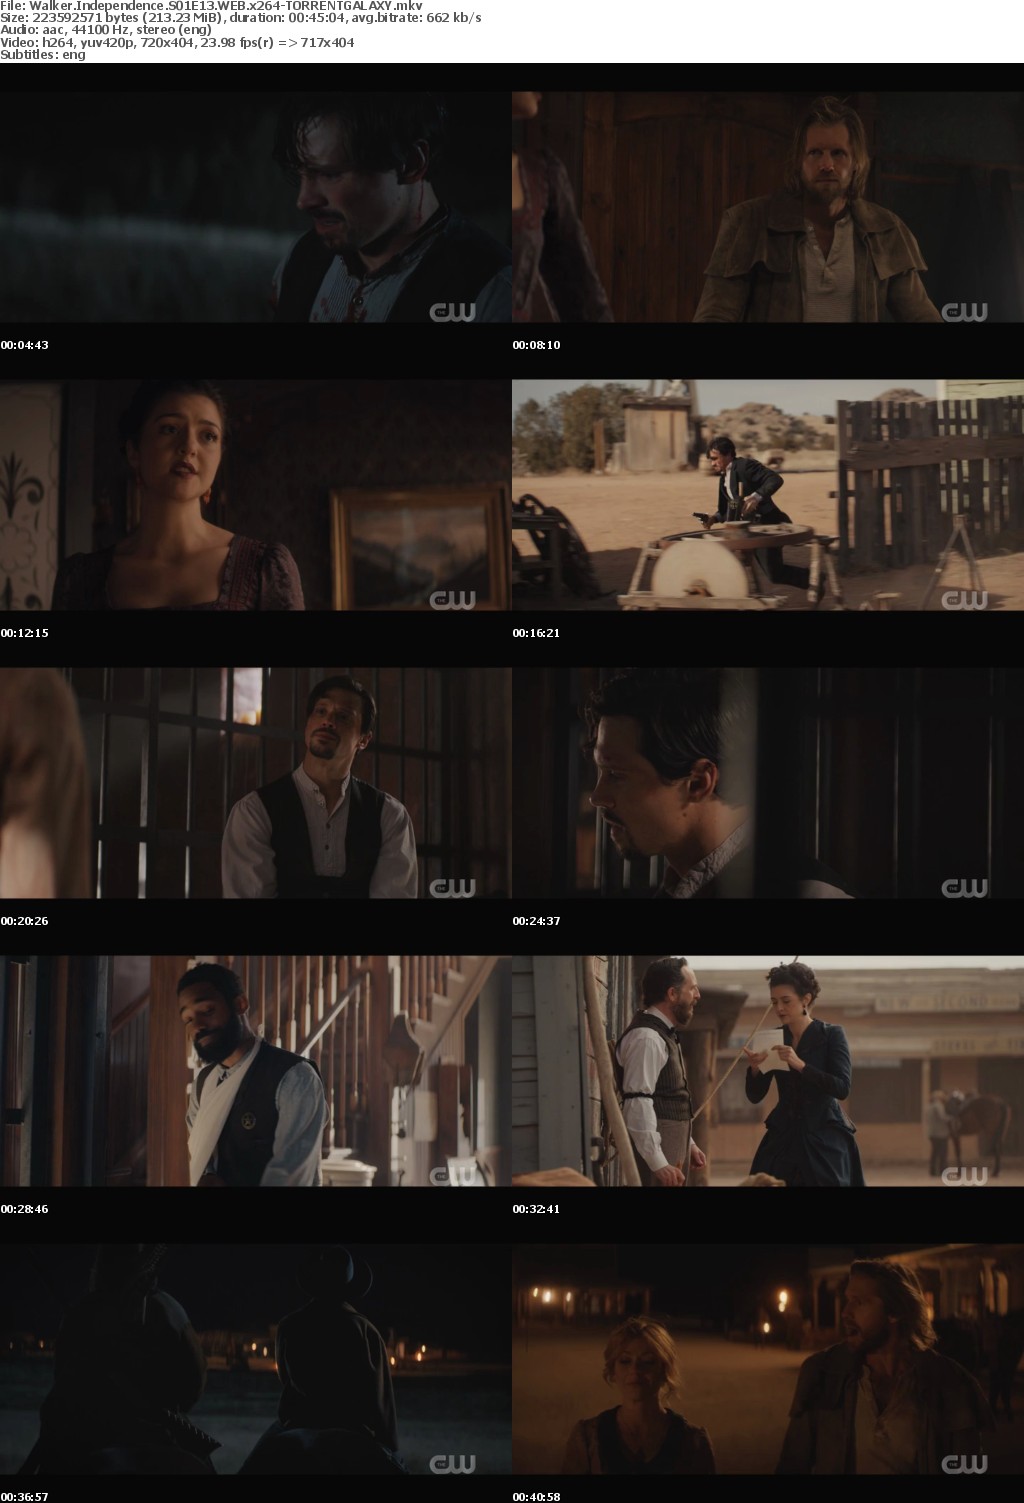 Walker Independence S01E13 WEB x264-GALAXY